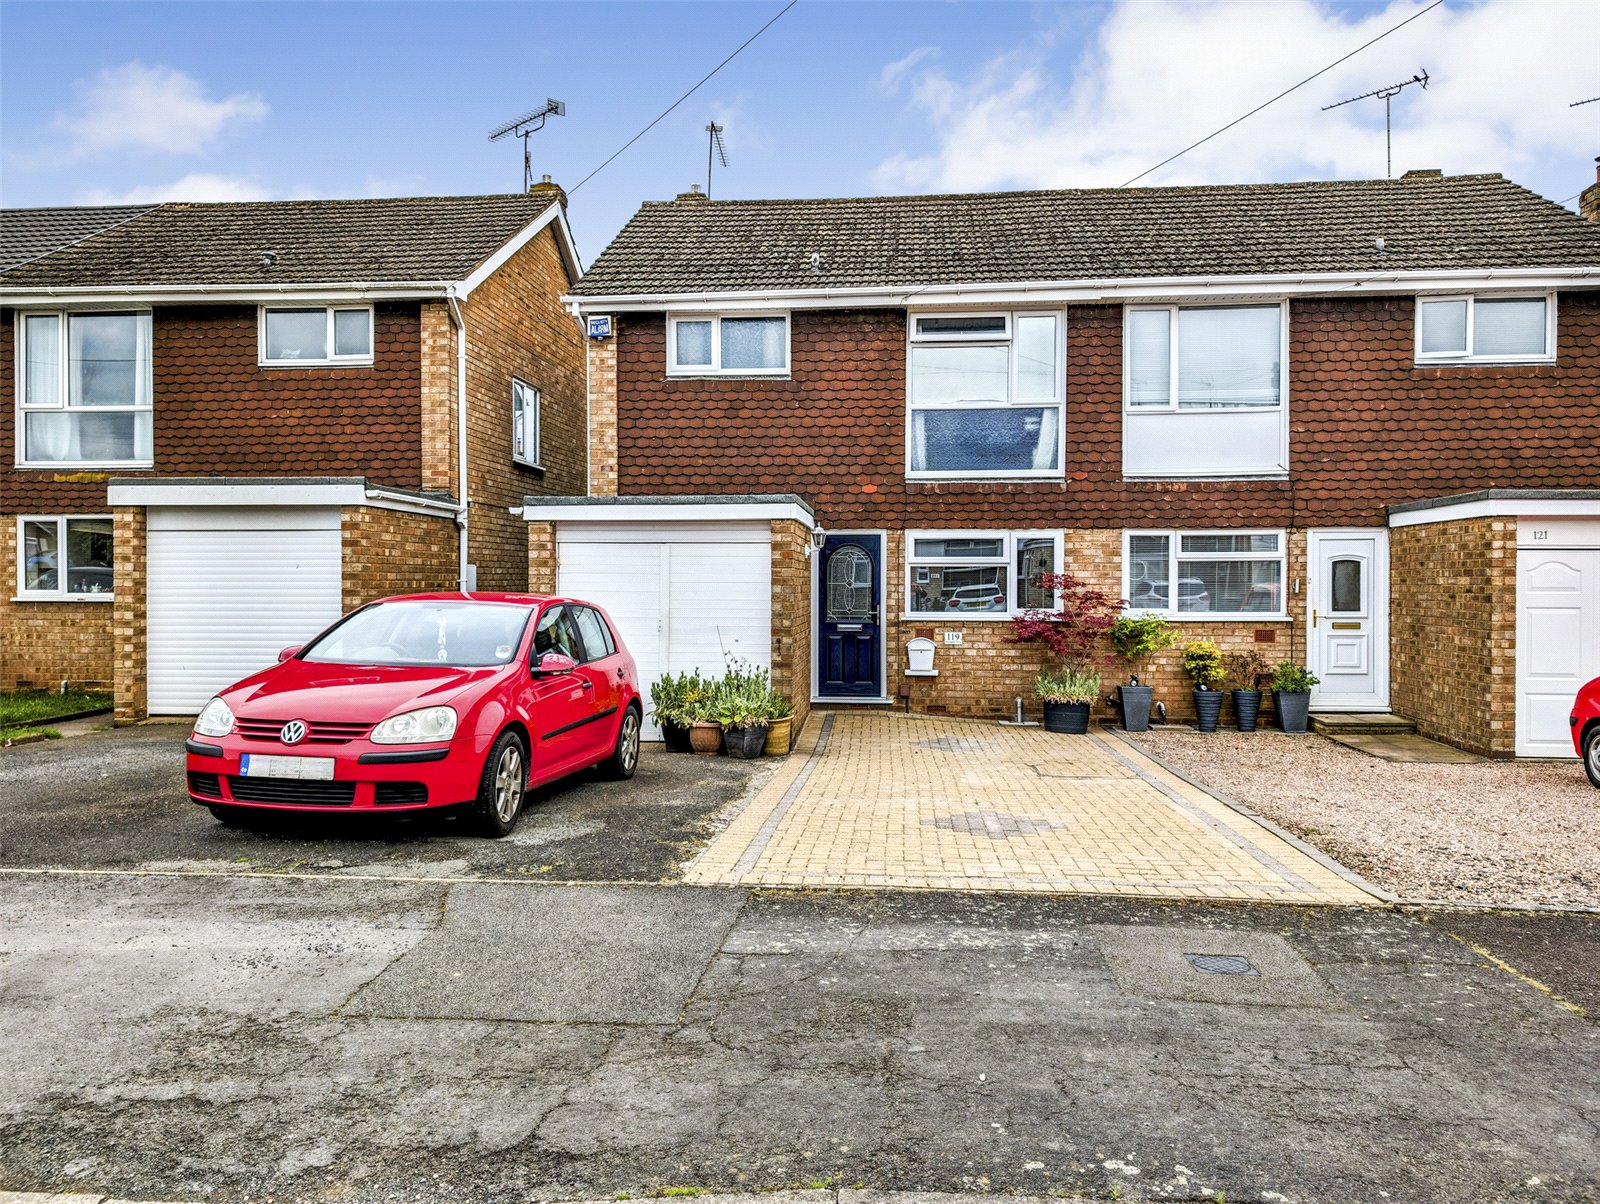 Coningsby Drive, Kidderminster, Worcestershire, DY11